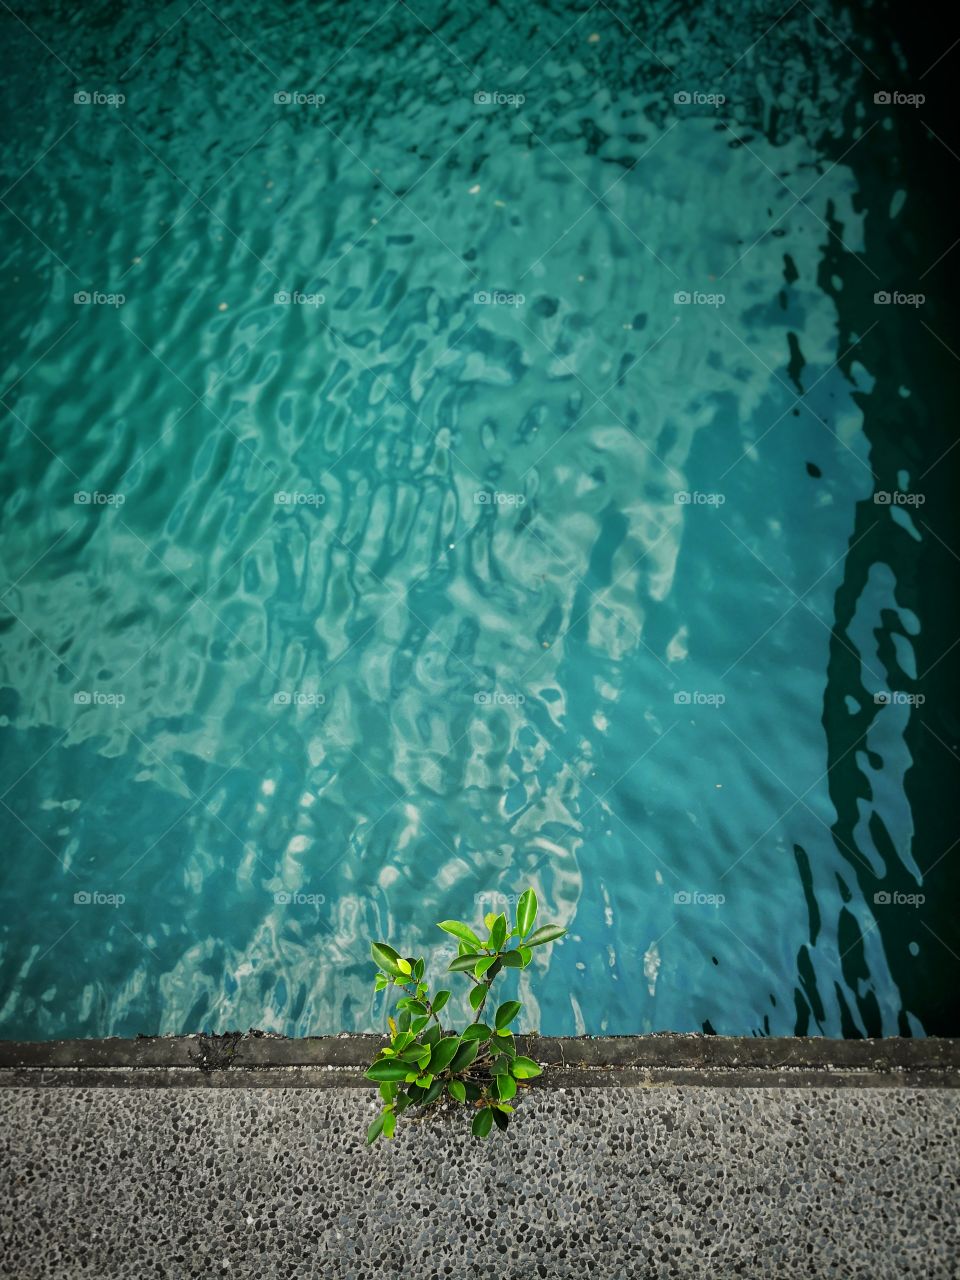 A little plant growing at the dock next to a lake.